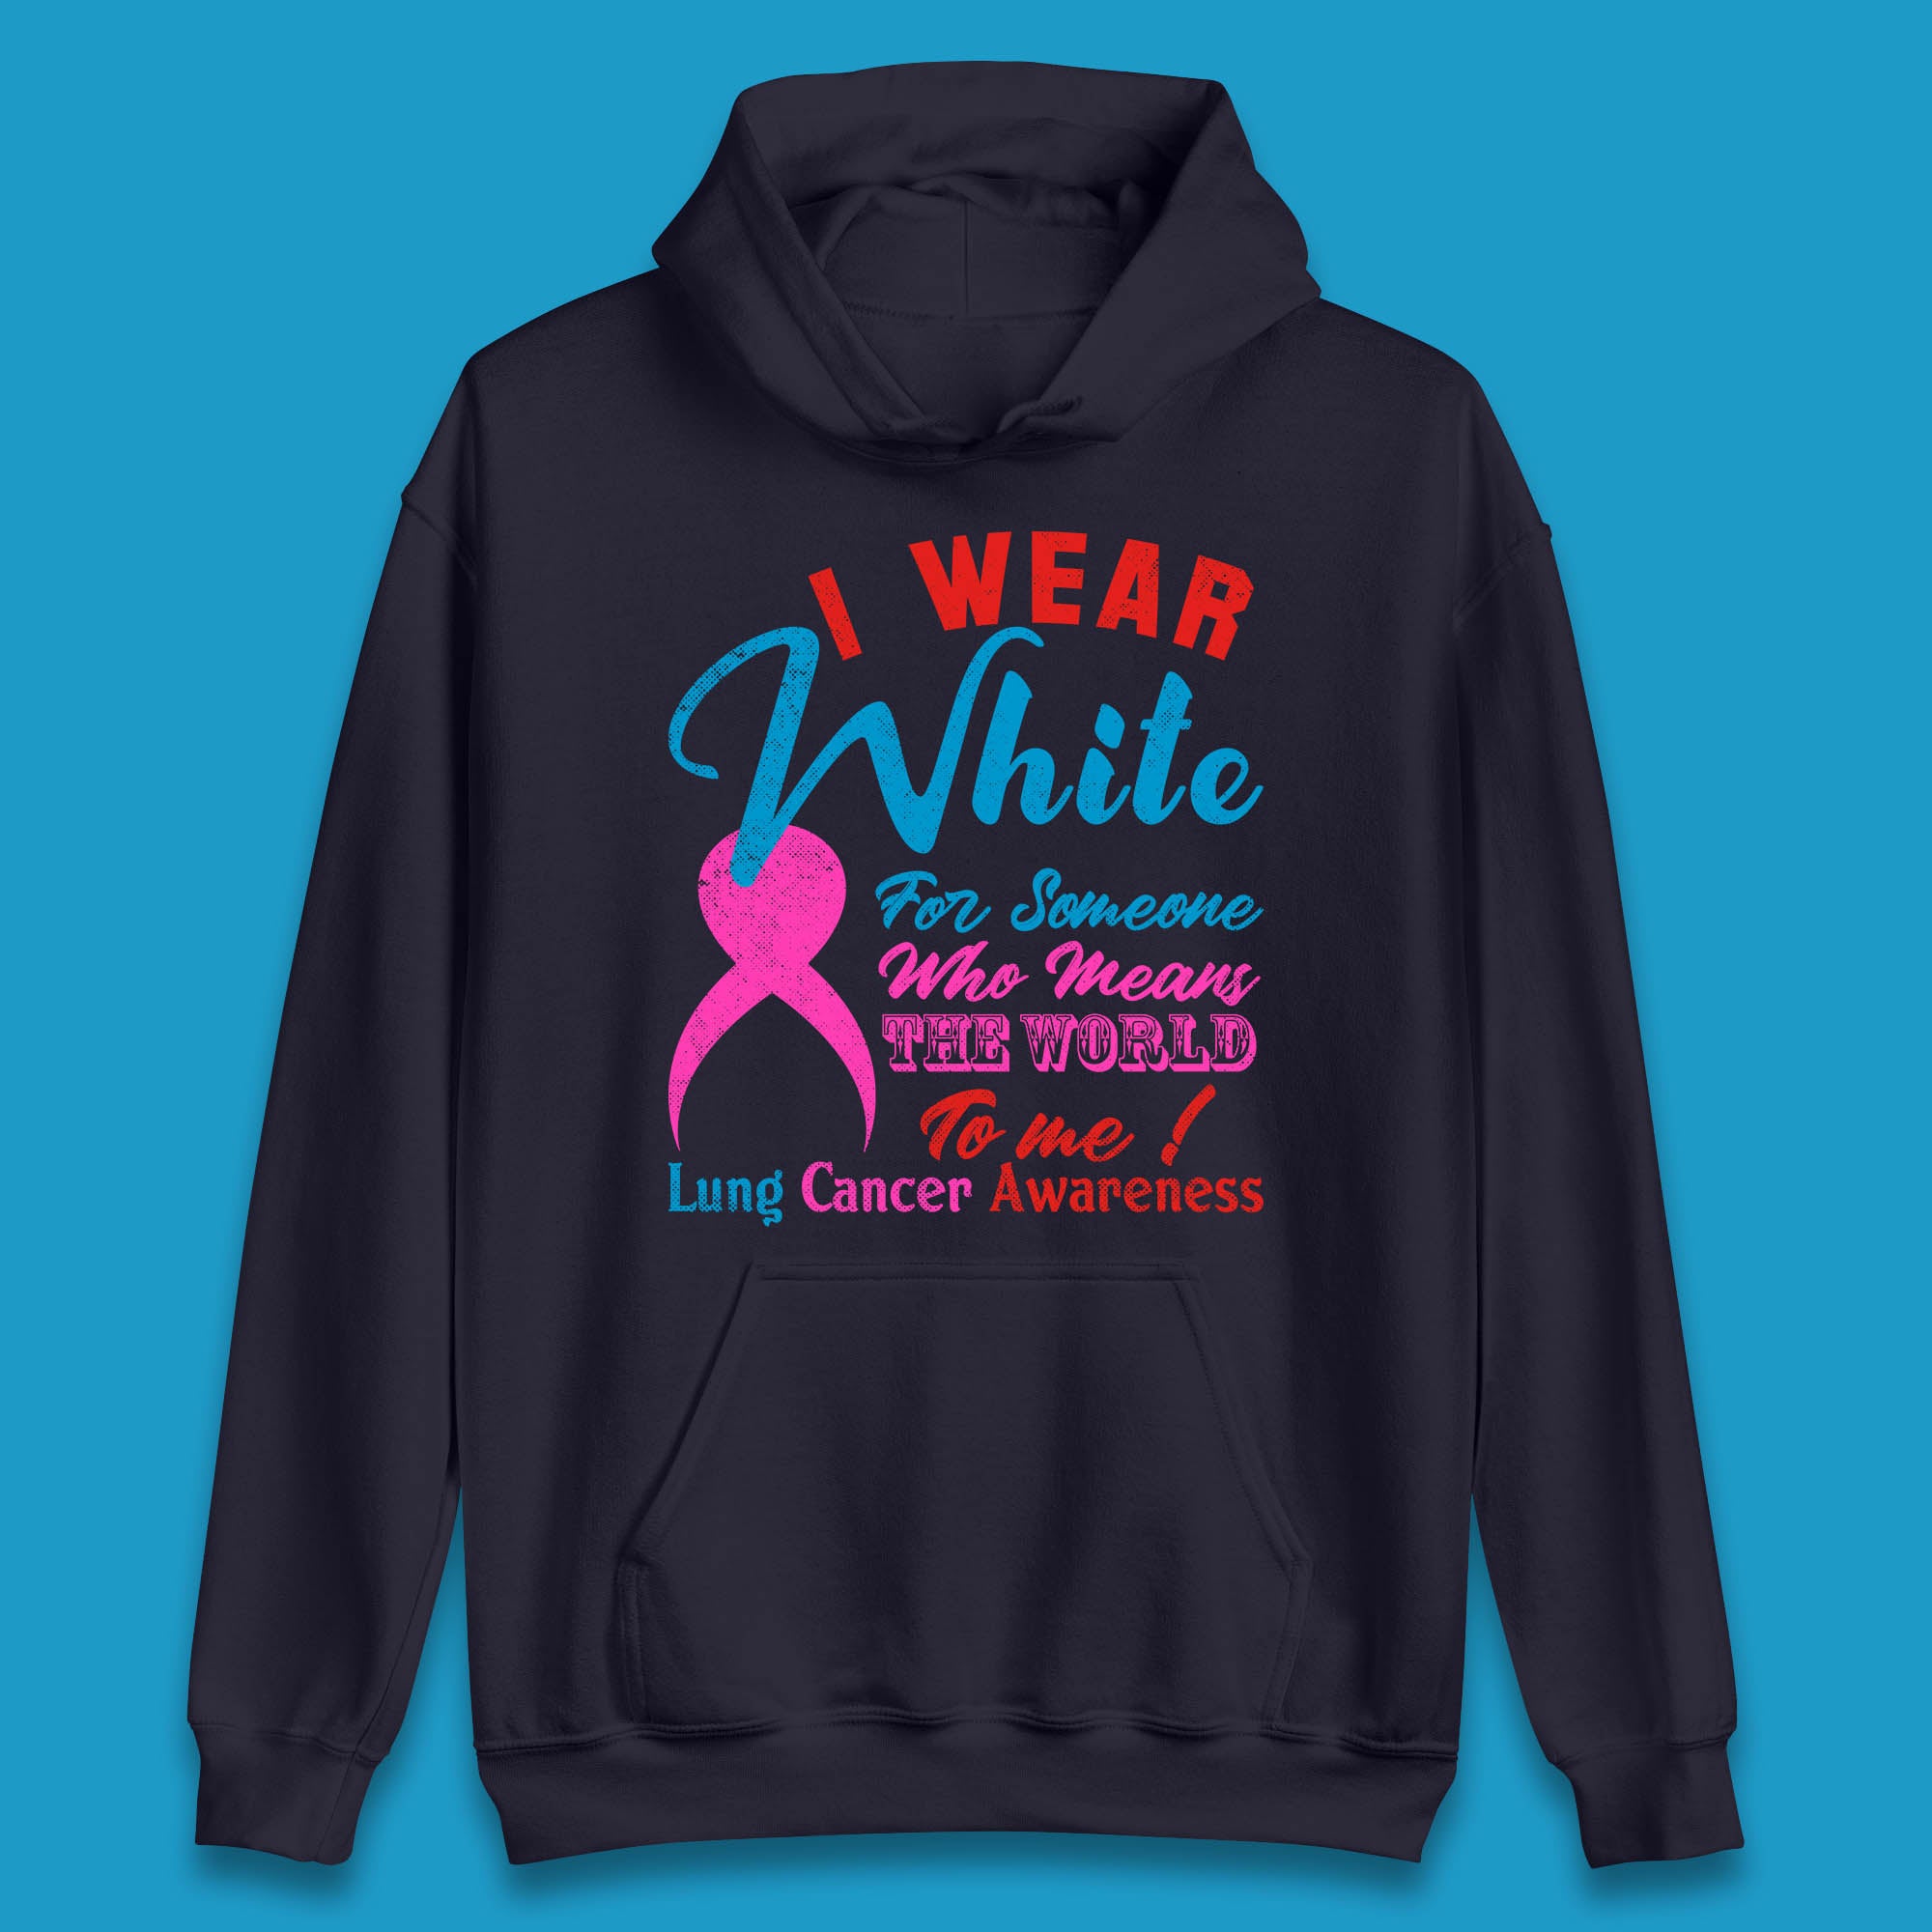 I Wear White For Someone Who Means The World To Me Lung Cancer Awareness Warrior Unisex Hoodie